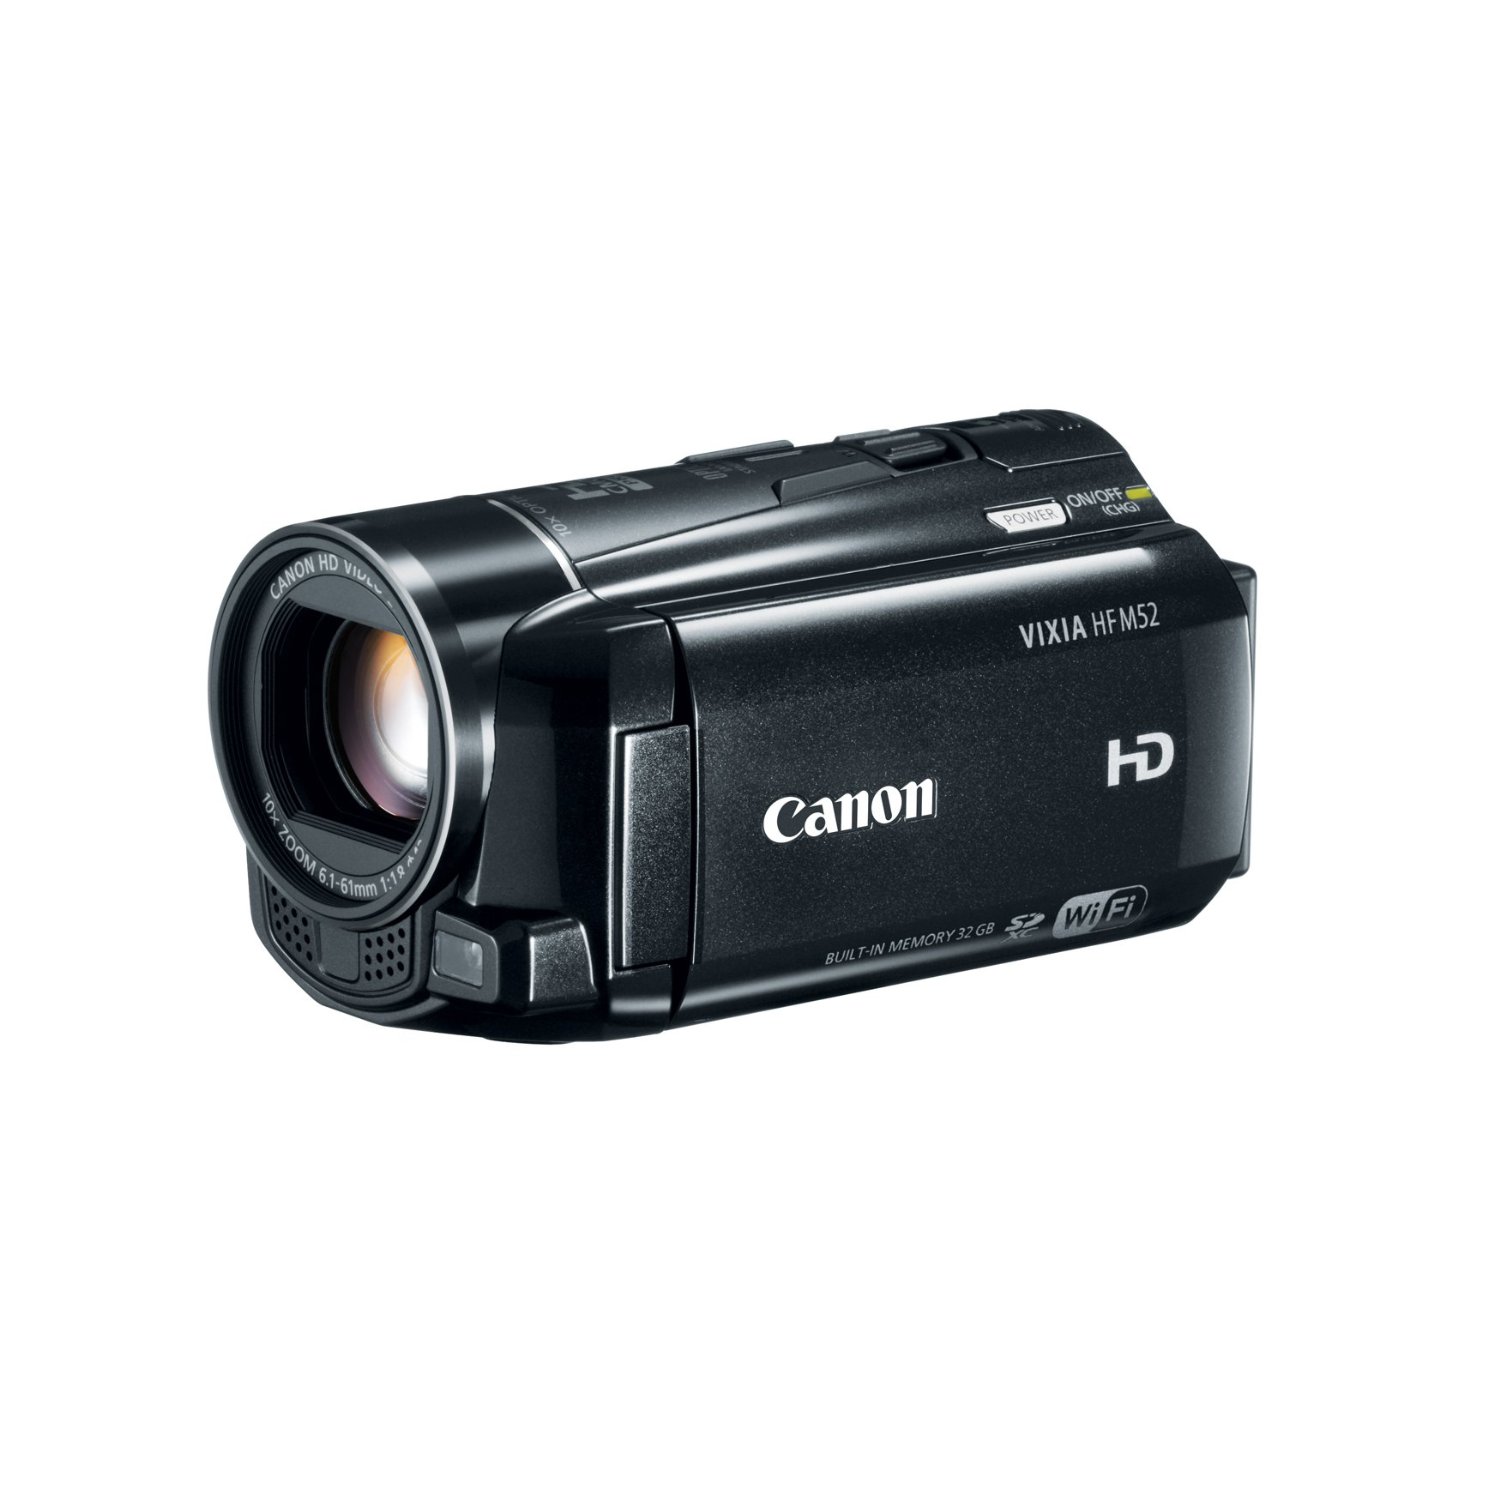 http://thetechjournal.com/wp-content/uploads/images/1204/1334815378-canon-vixia-hf-m52-full-hd-10x-image-stabilize-camcorder-5.jpg